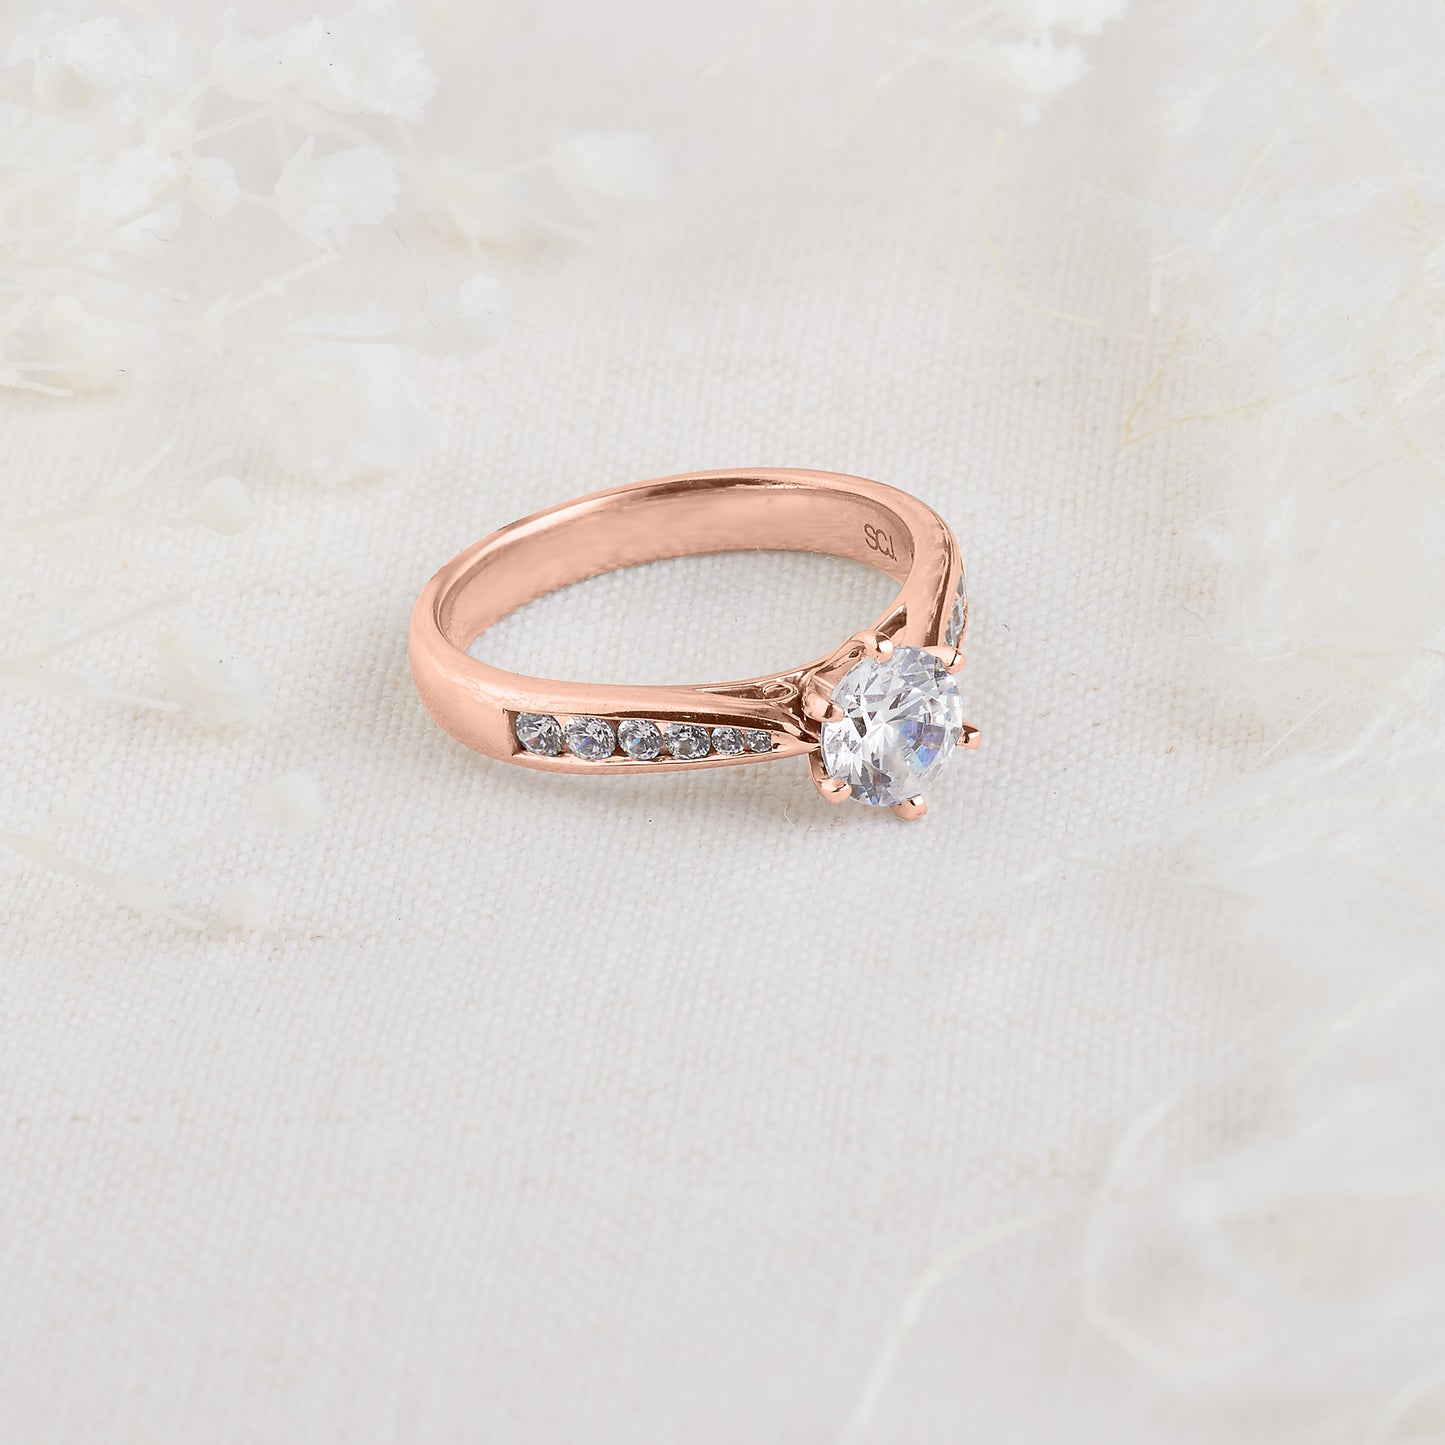 18K Rose Gold Round Brilliant Diamond Solitaire With Shoulder Accents Engagement Ring 1.0tdw 0.8ct